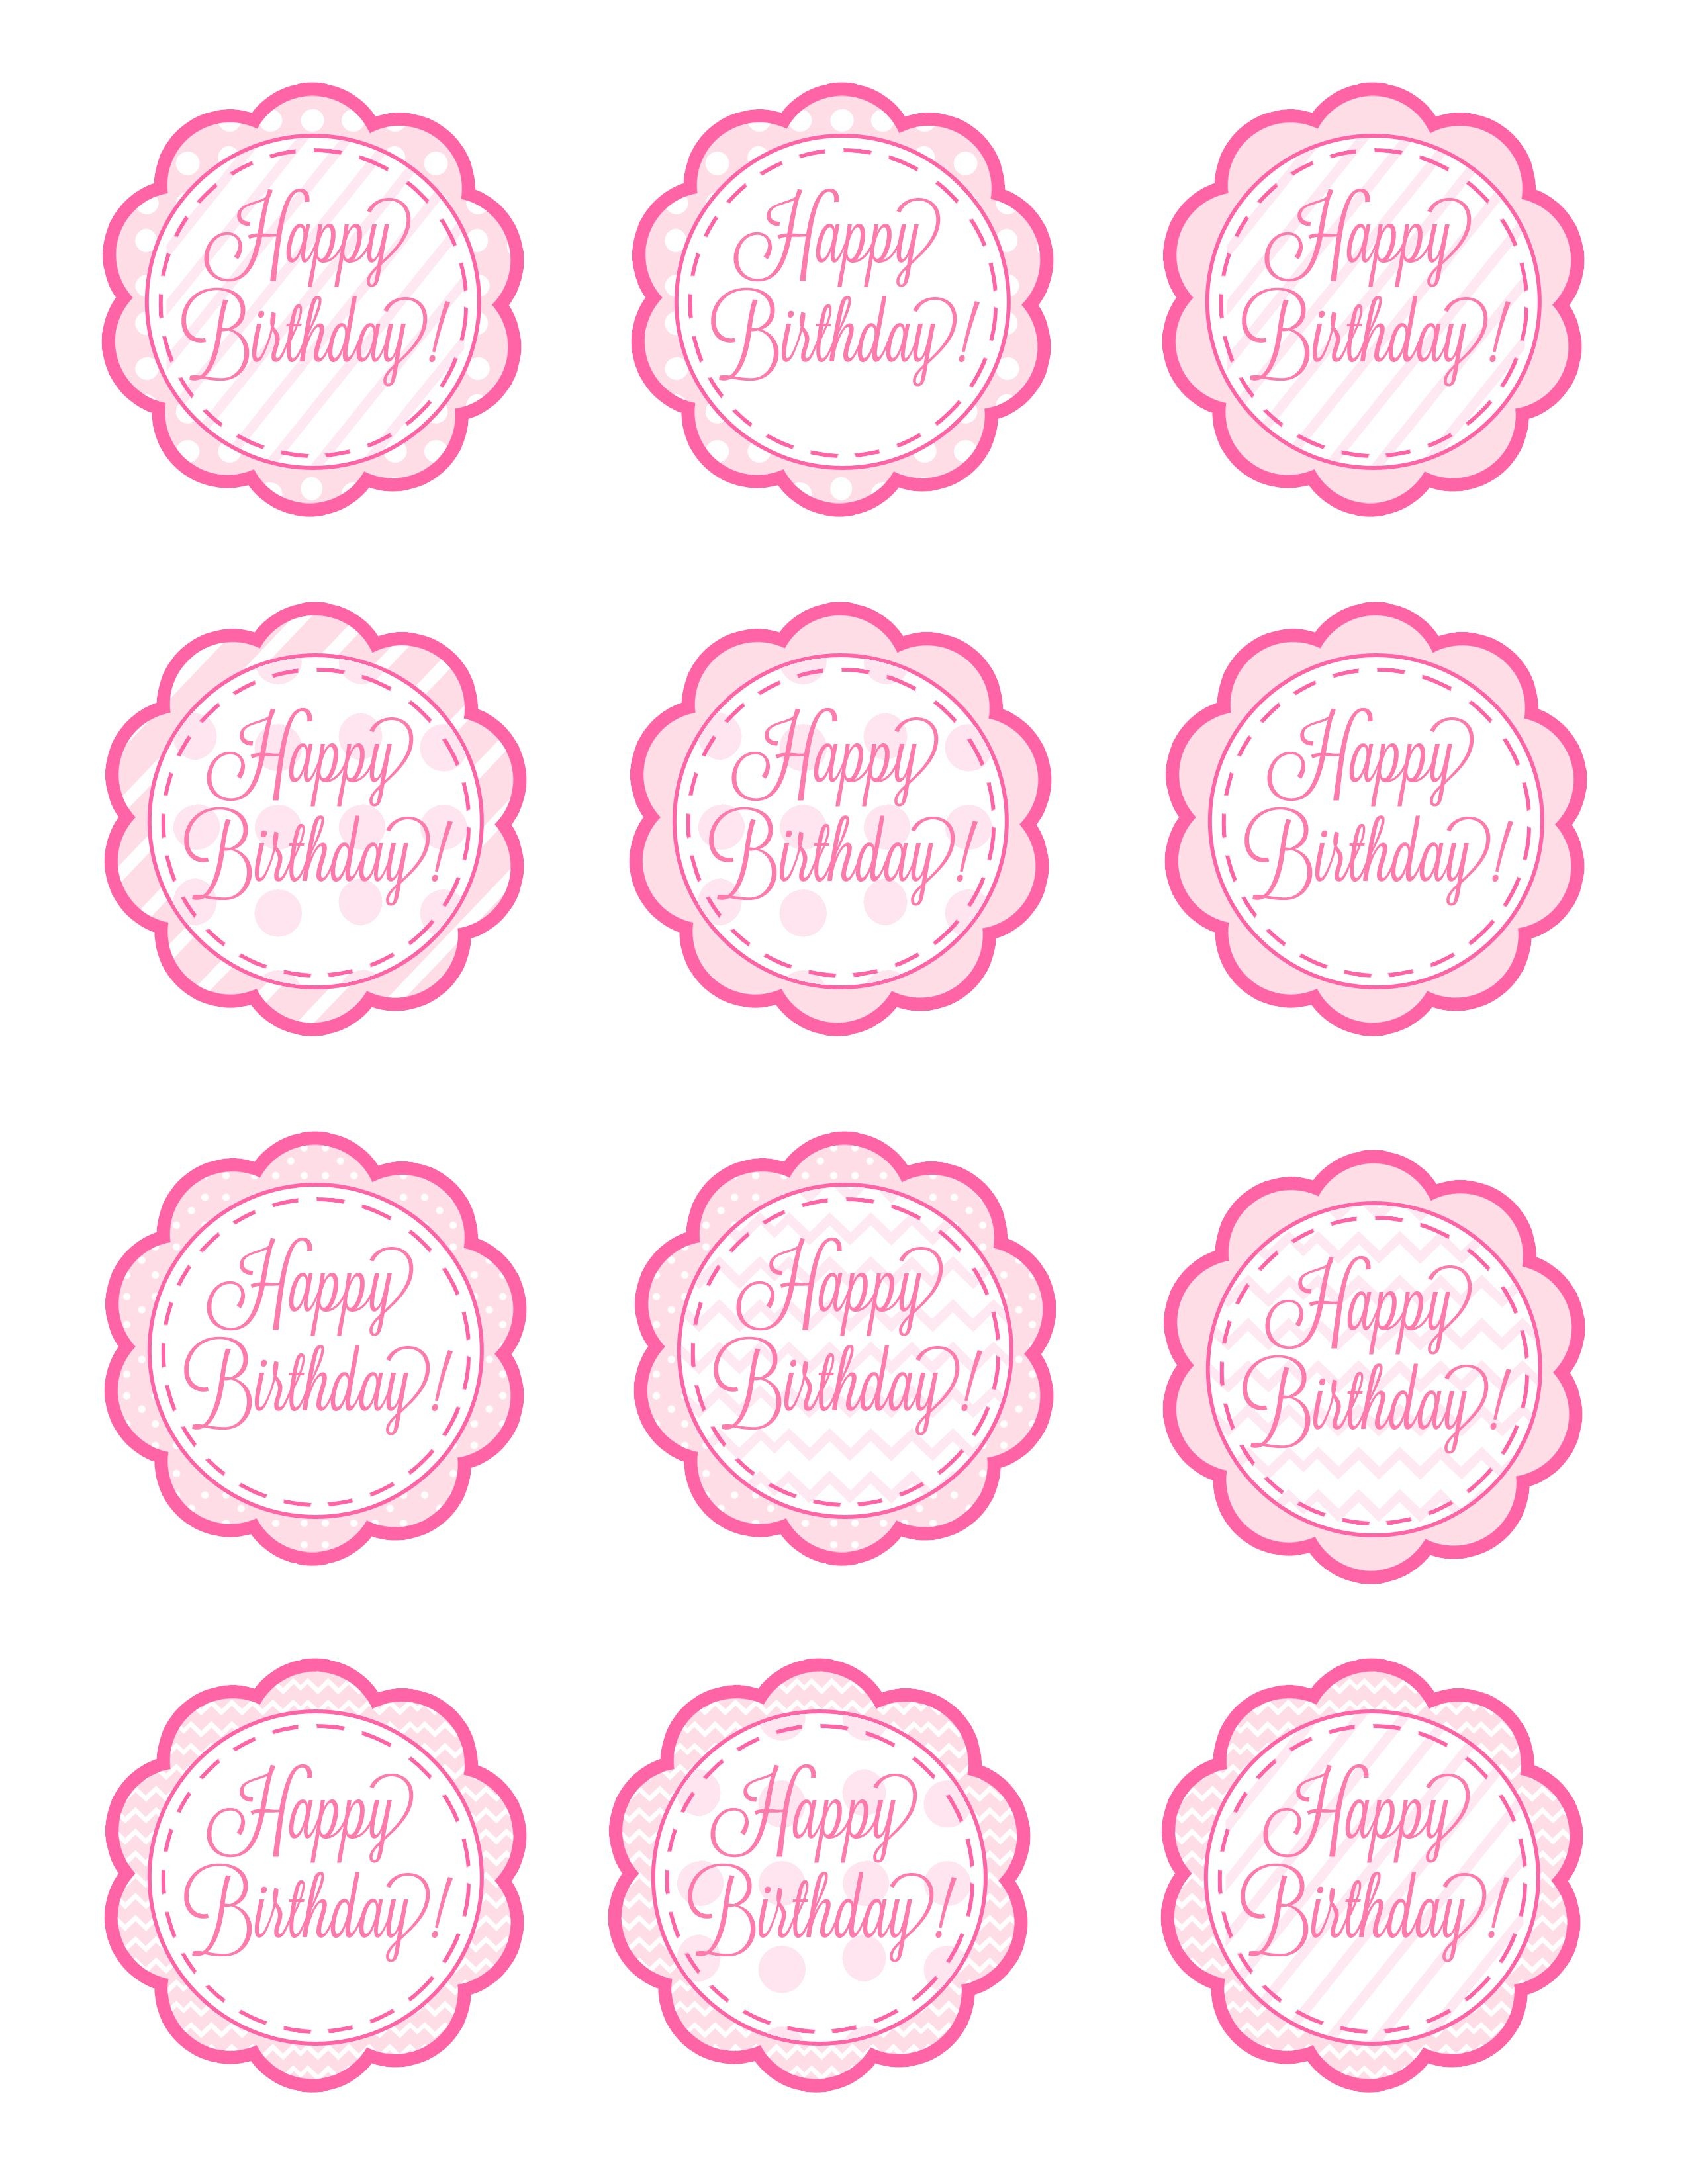 Free Printable Christening Cupcake Topper Template